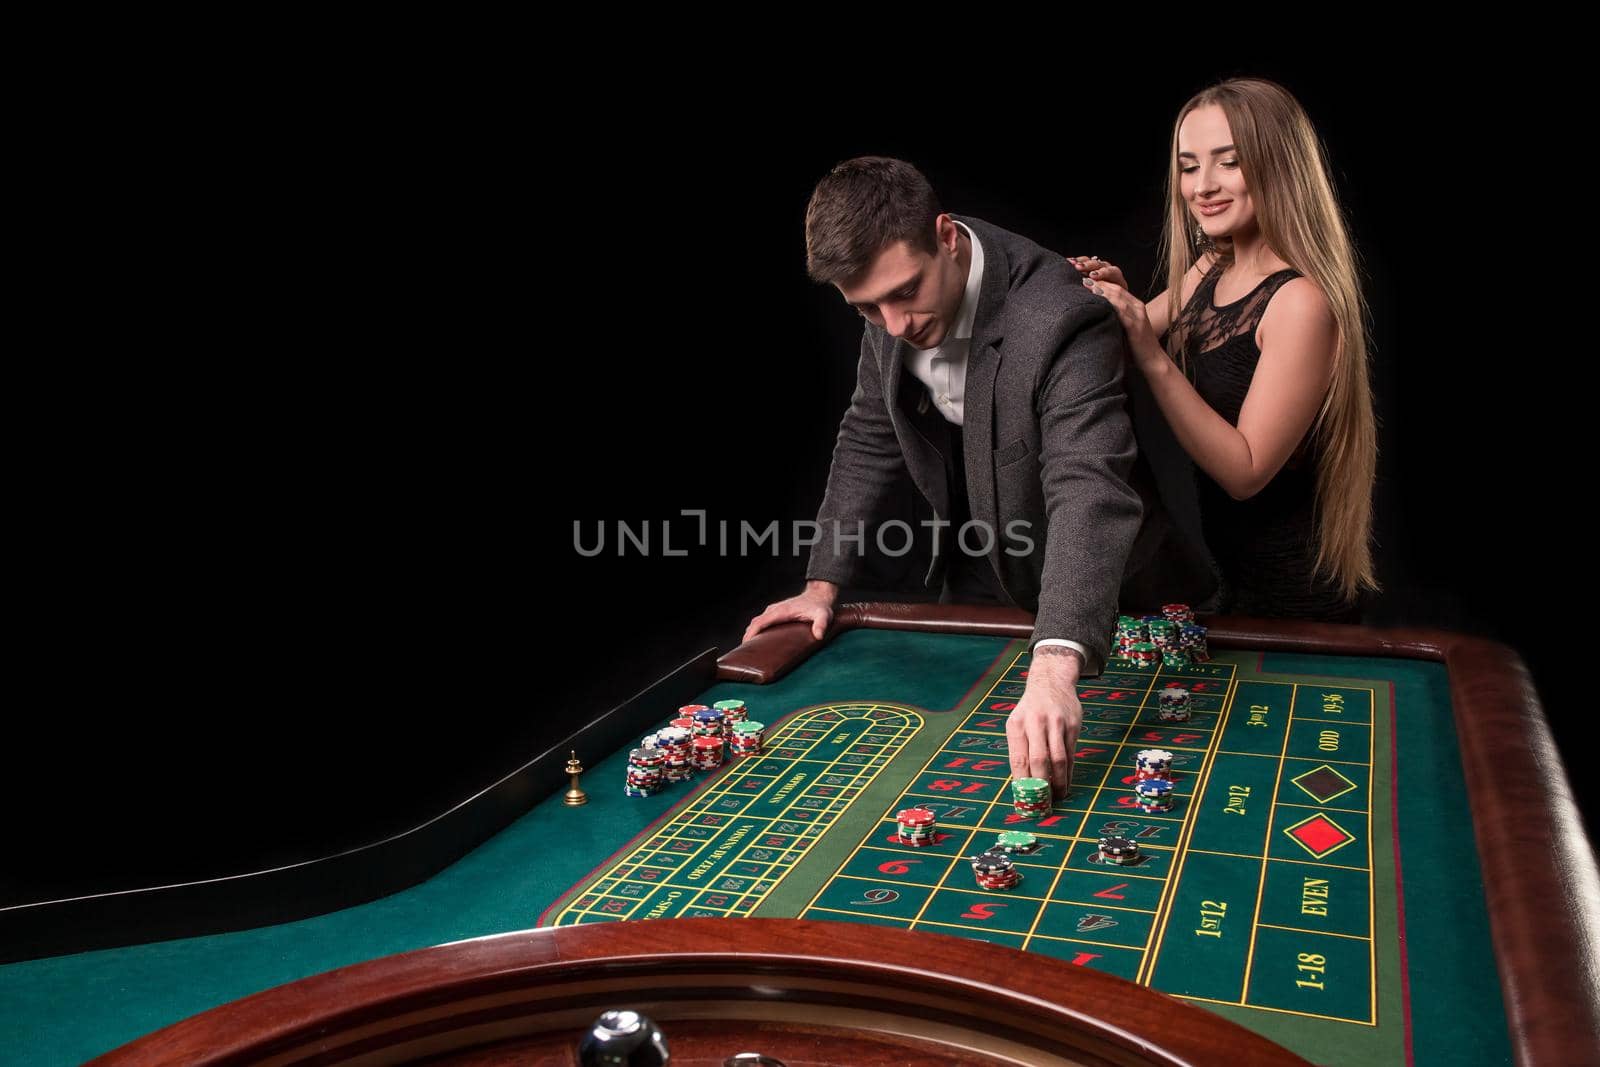 Elegant couple at the casino betting on the roulette, on a black background by nazarovsergey